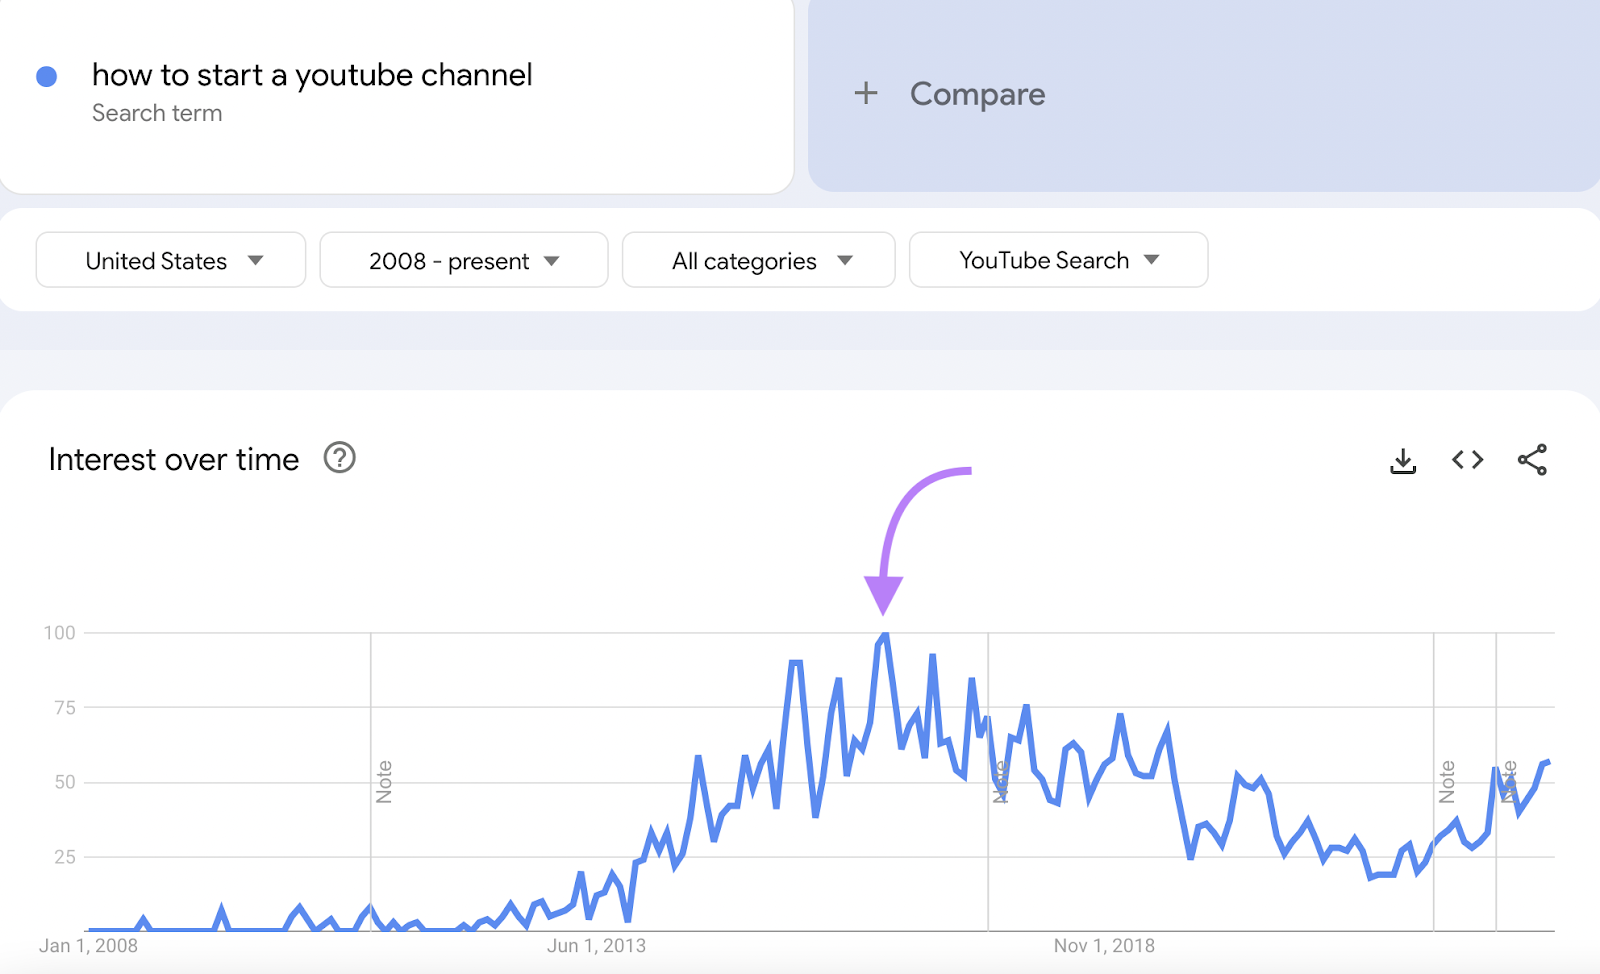 Google Trends graph for “how to start a youtube channel” search